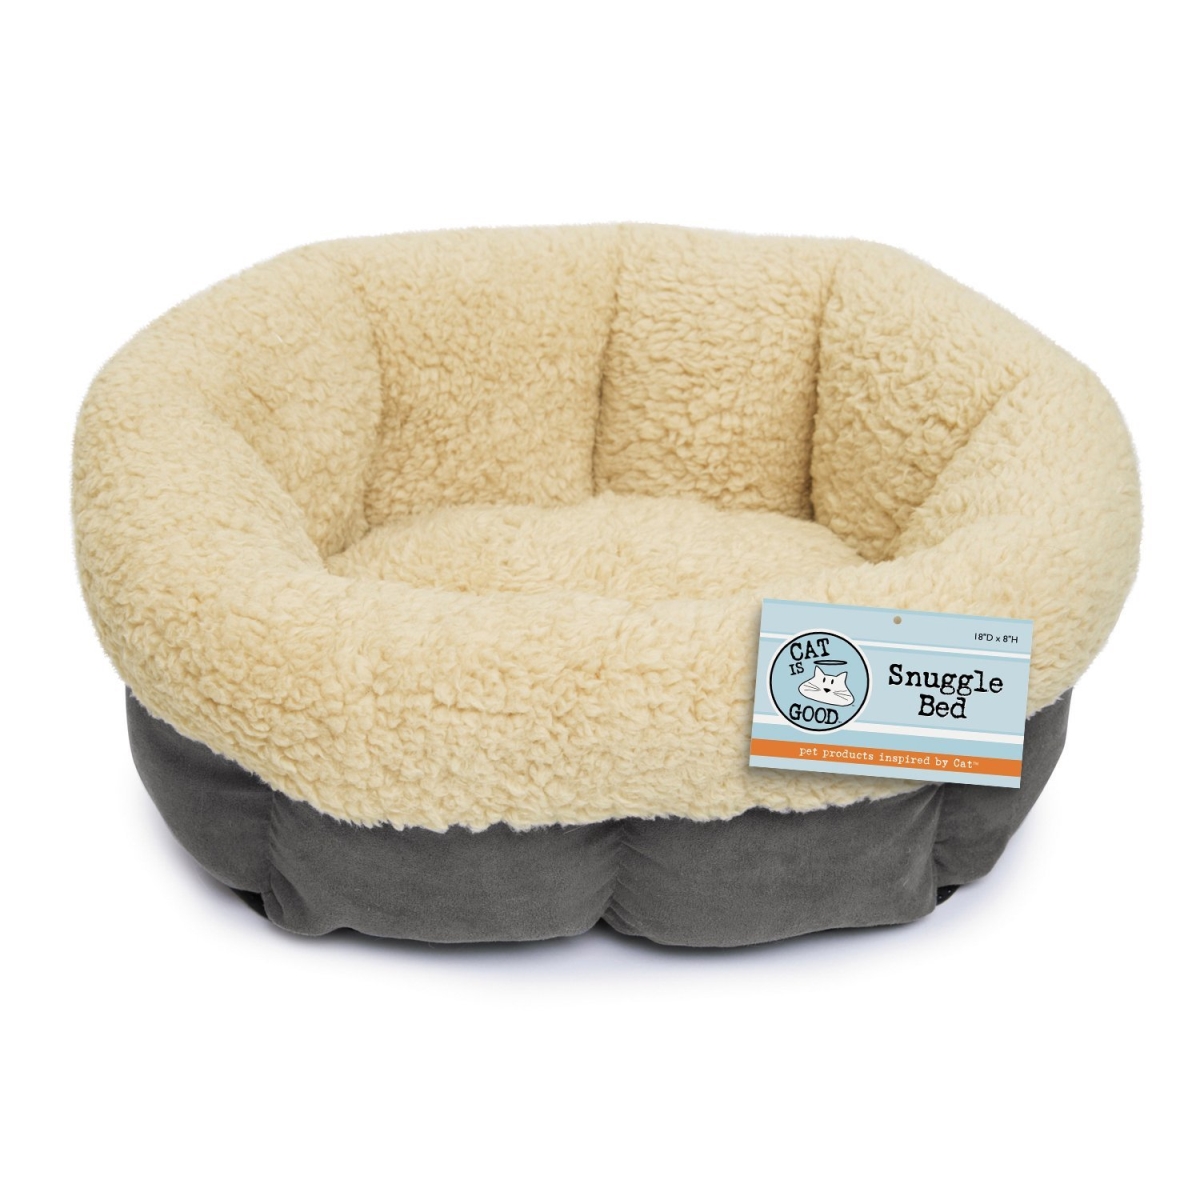 Picture of Cat is Good Snuggle Cat Bed  Gray  - CI3991 11